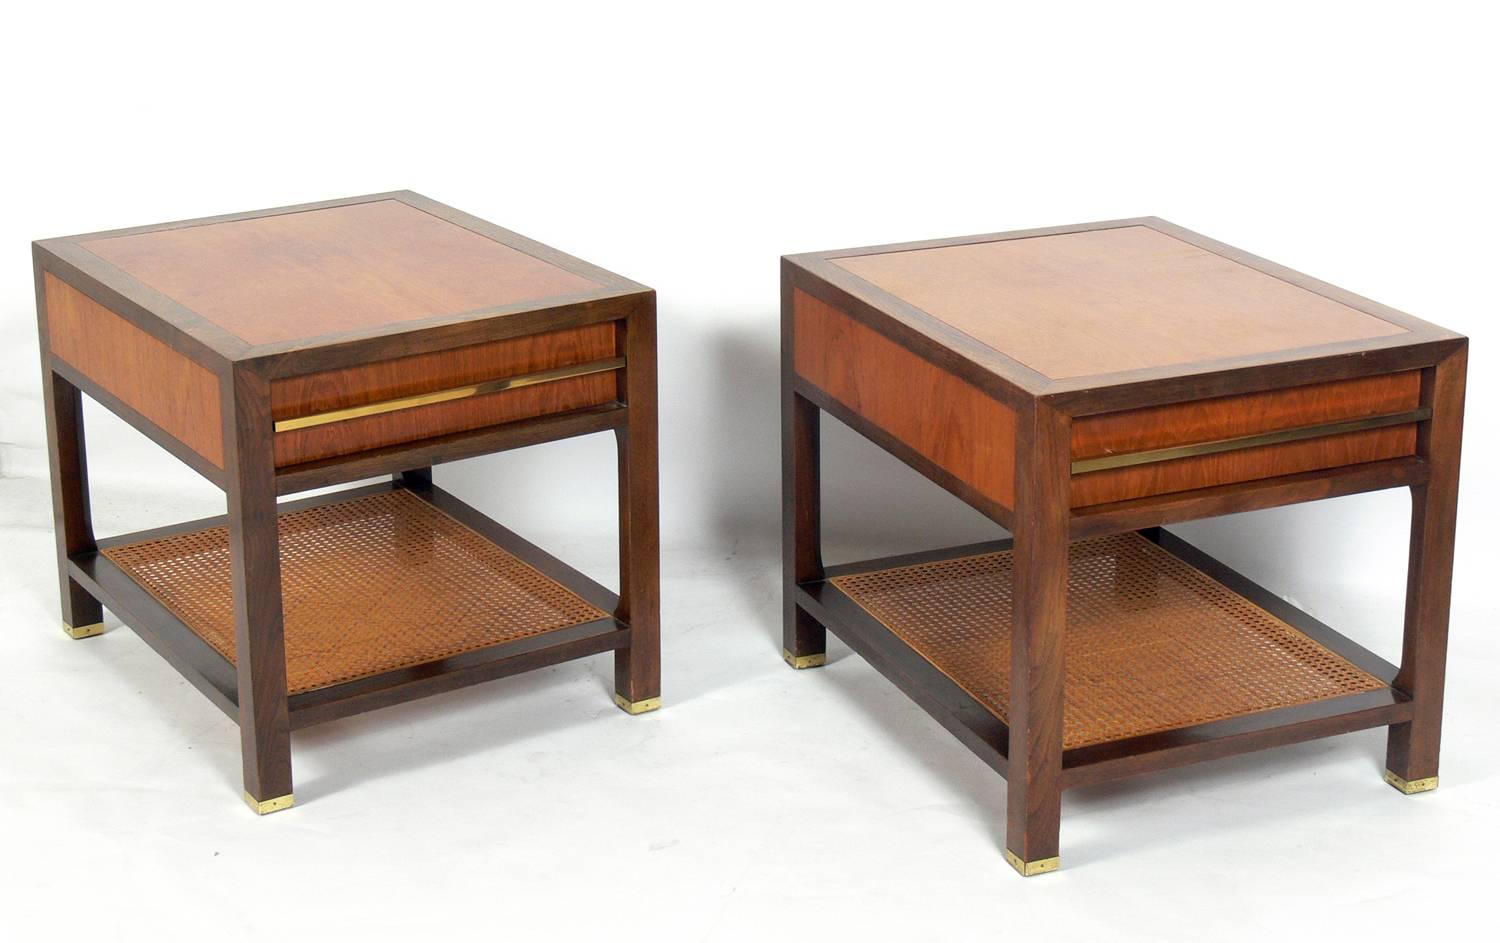 Pair of clean lined end tables, designed by Michael Taylor for Baker, American, circa 1960s. They are a versatile size and can be used as side or end tables in a living area, or as nightstands in a bedroom.